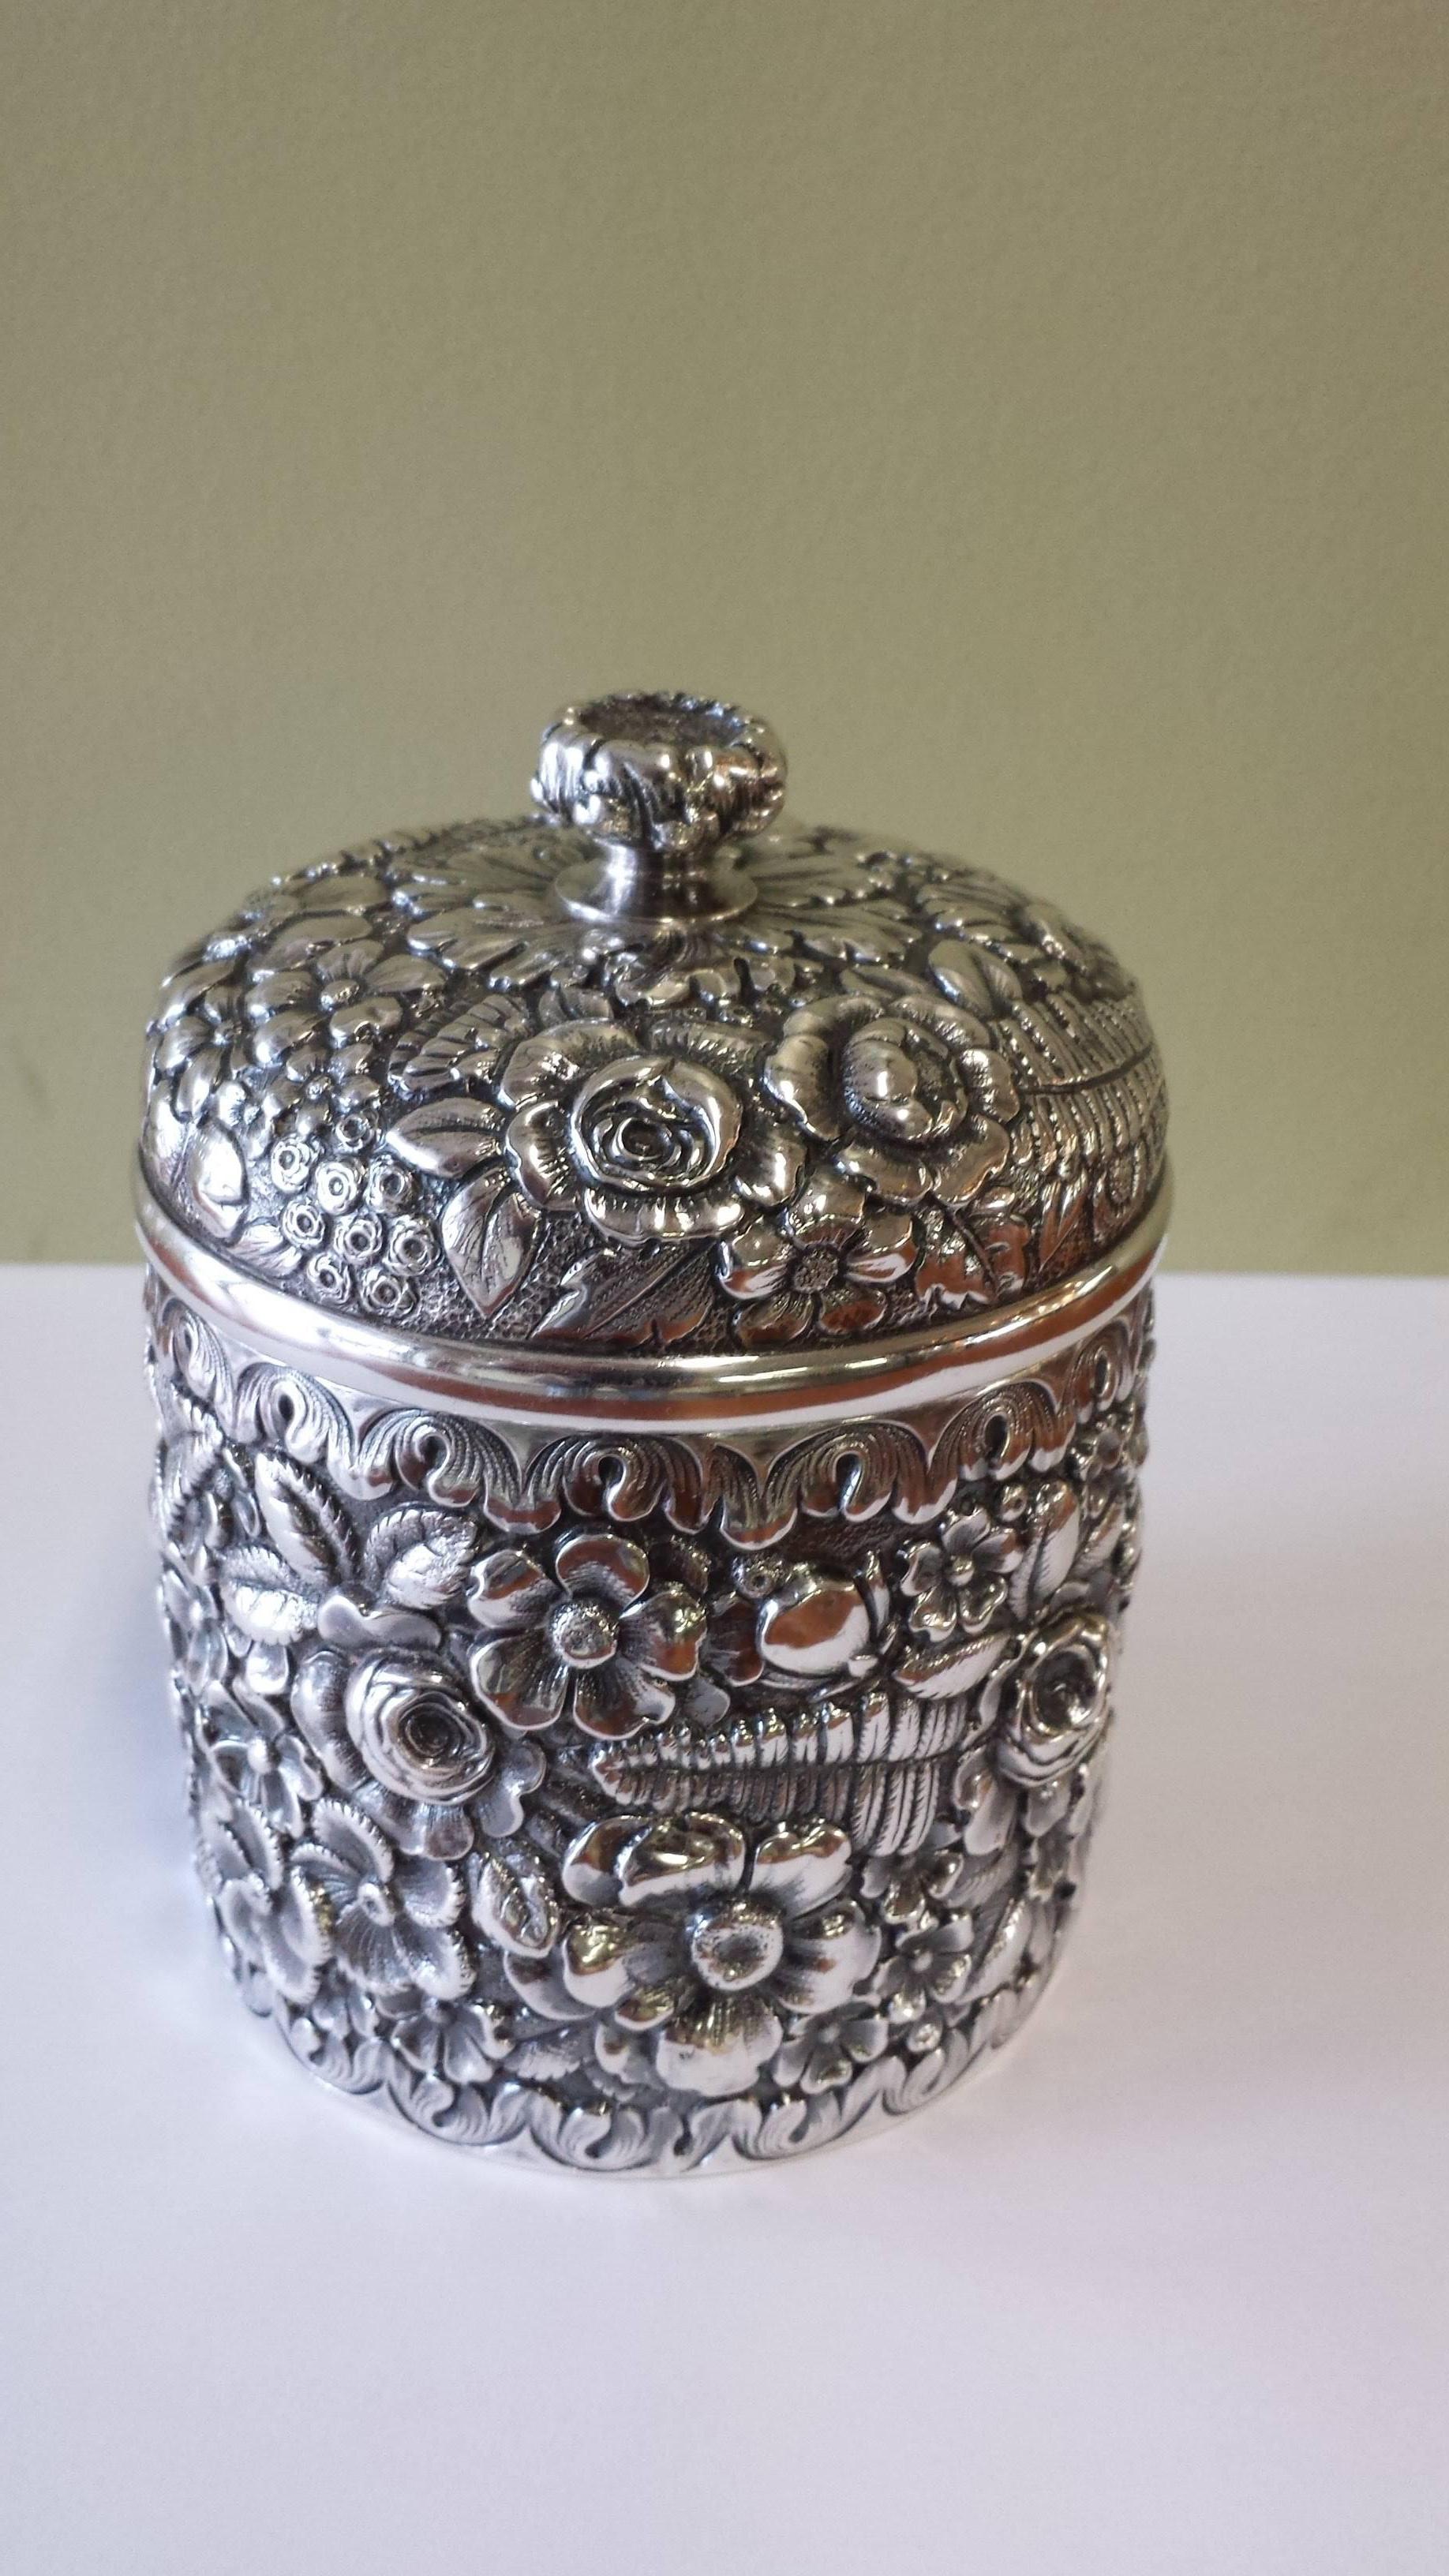 Tiffany Sterling Silver Covered Dresser Jar with a Gilt Interior 1